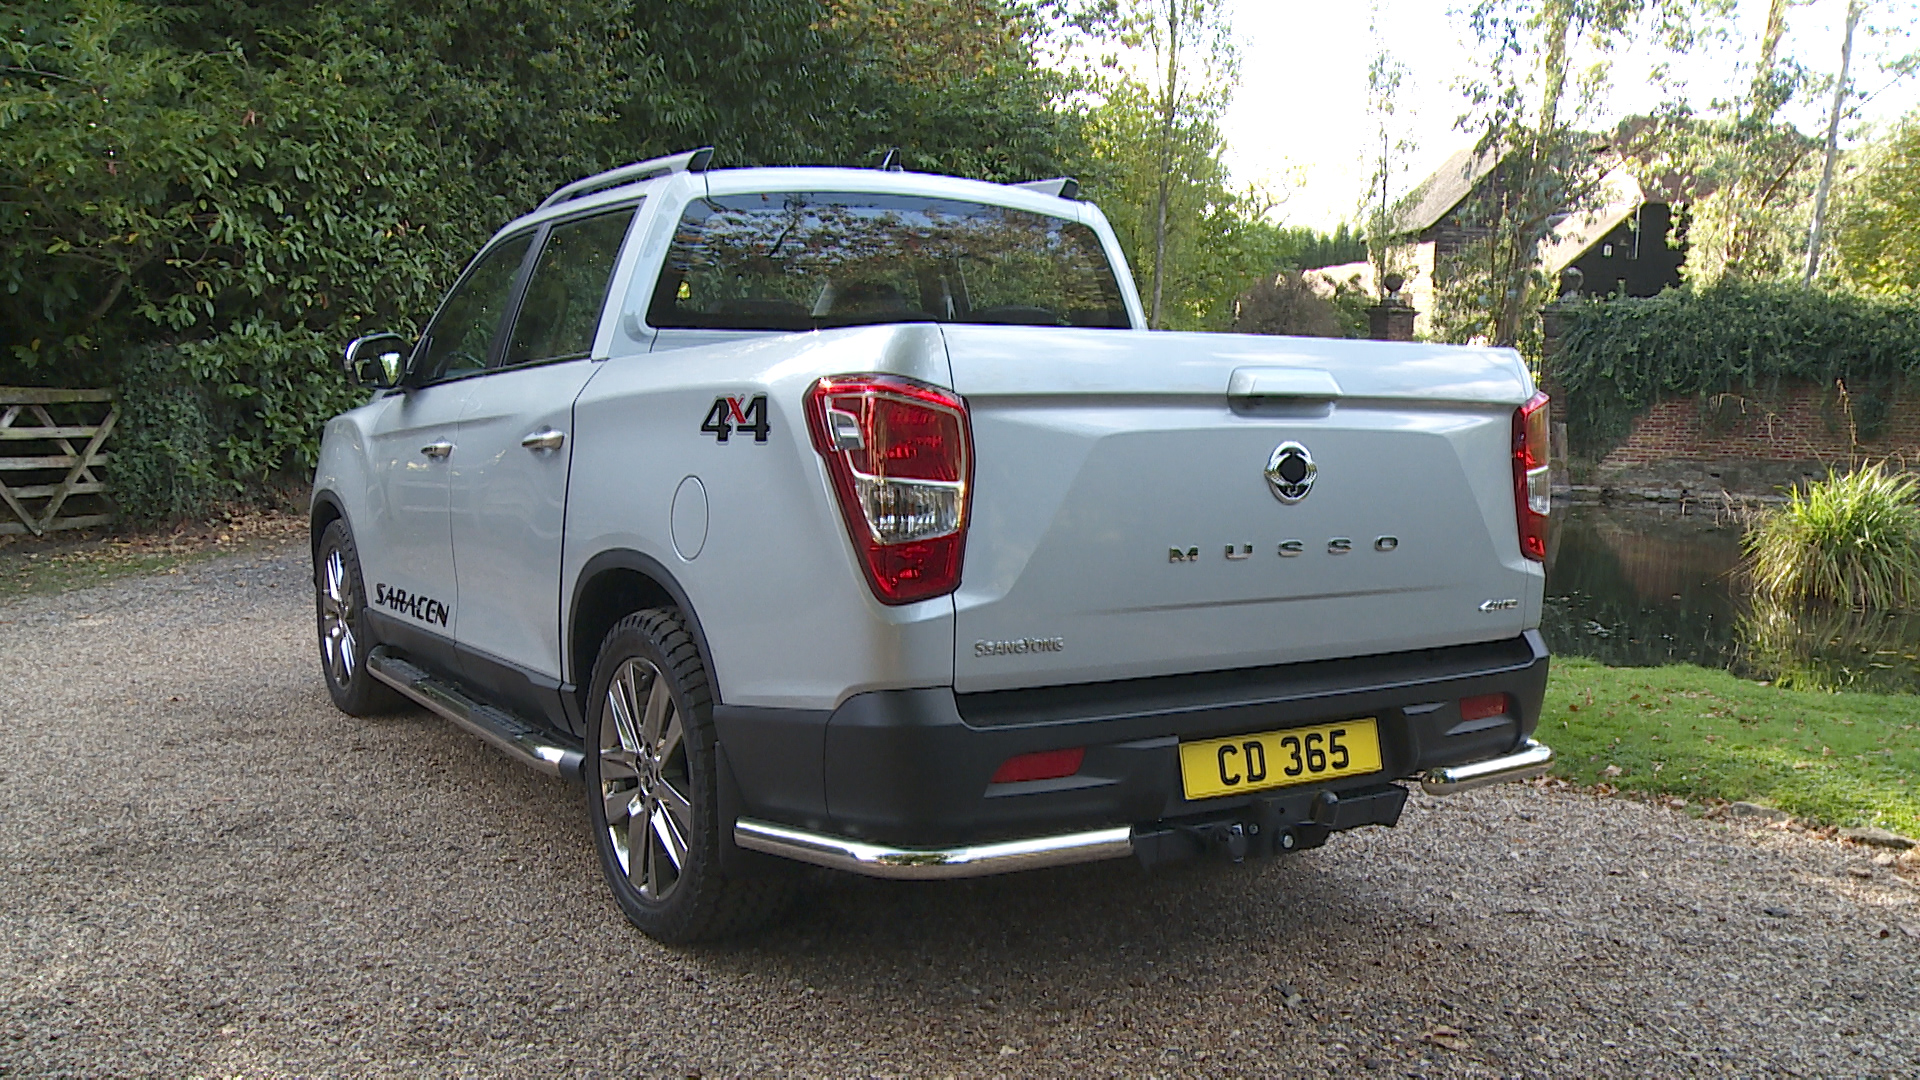 SSANGYONG MUSSO DIESEL Double Cab Pick Up 202S Rebel 4dr Auto AWD